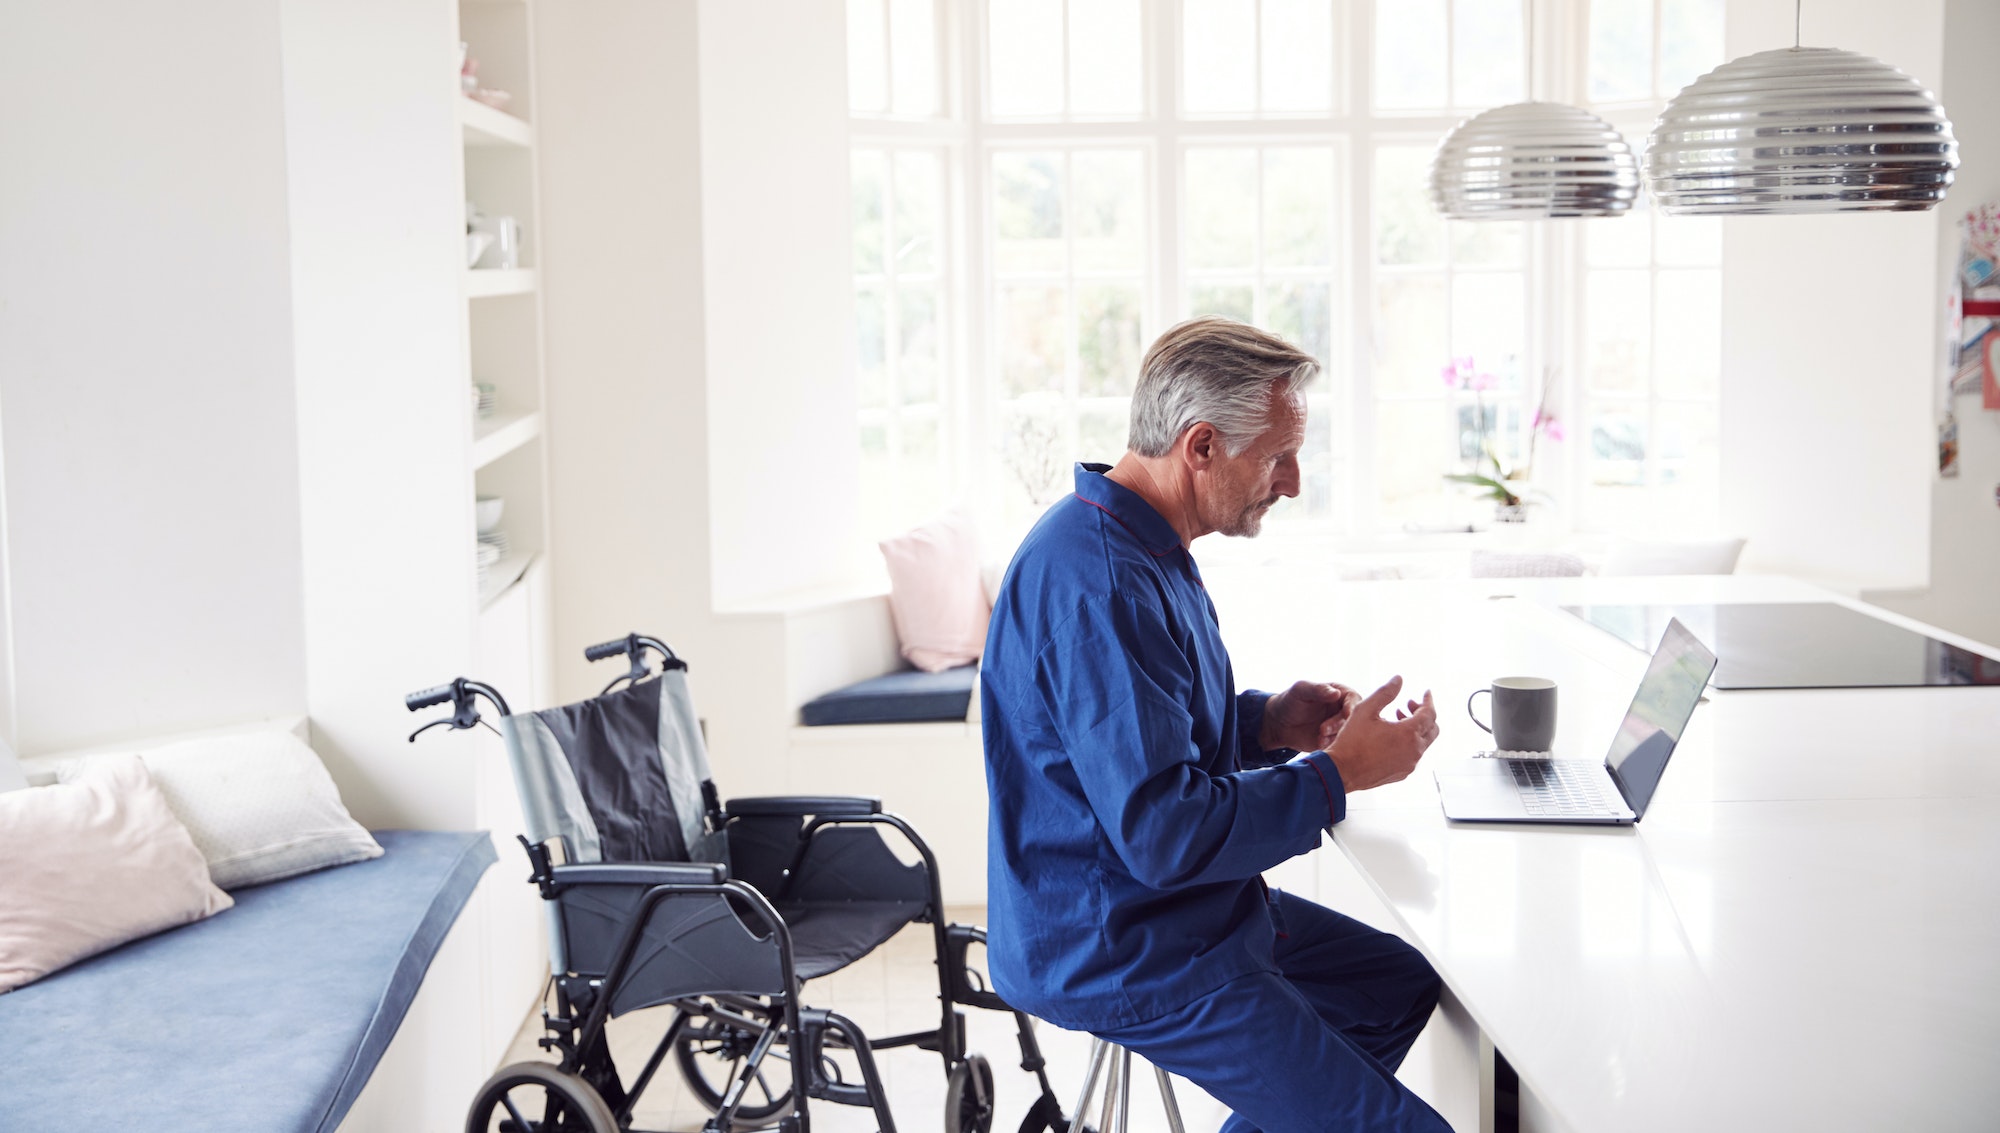 The Advantages of Smart Home Technology for Elderly and Disabled Individuals